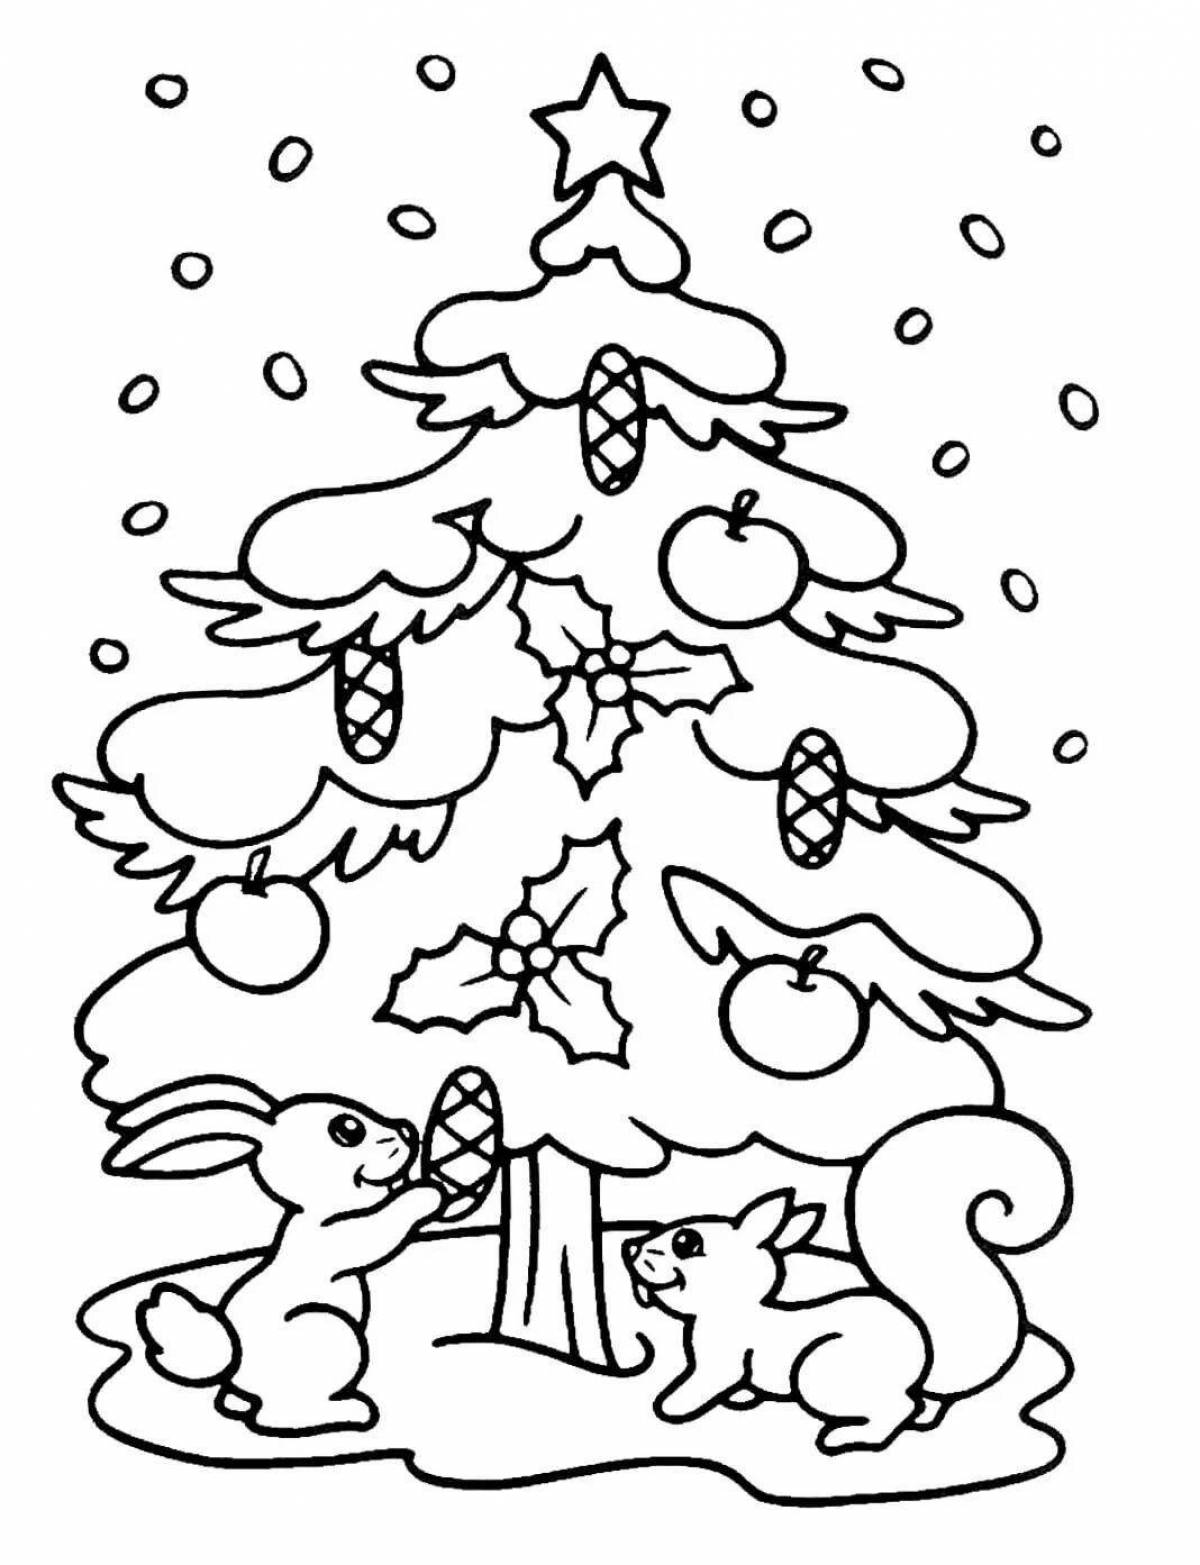 Christmas tree live coloring for kids